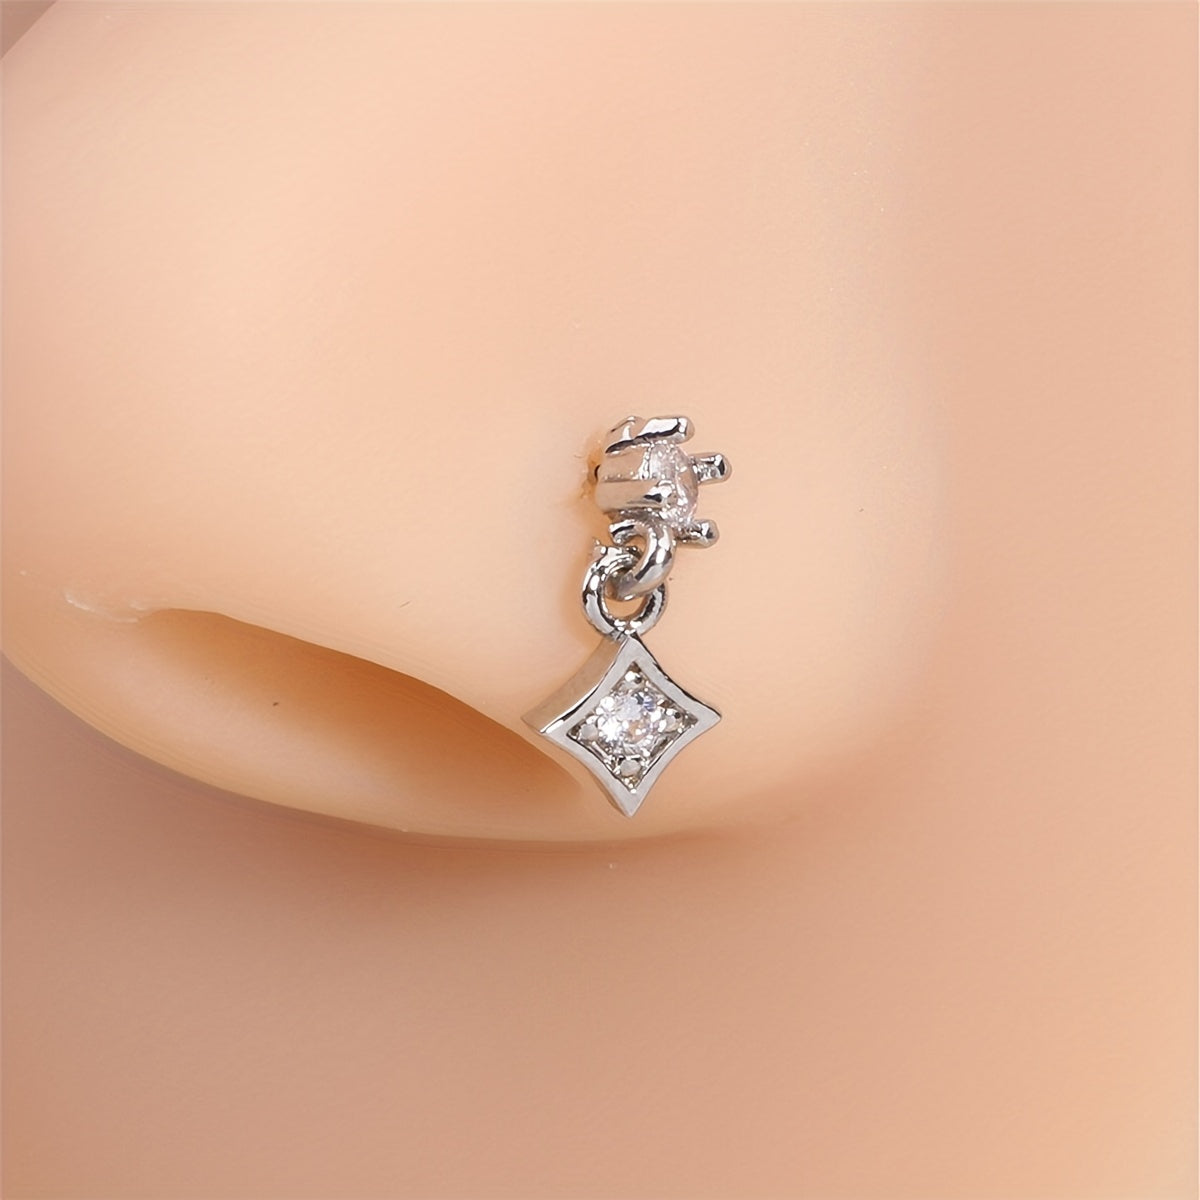 Inlaid Square Shape Zircon Pendant Nose Stud Ring For Women Body Piercing Jewelry